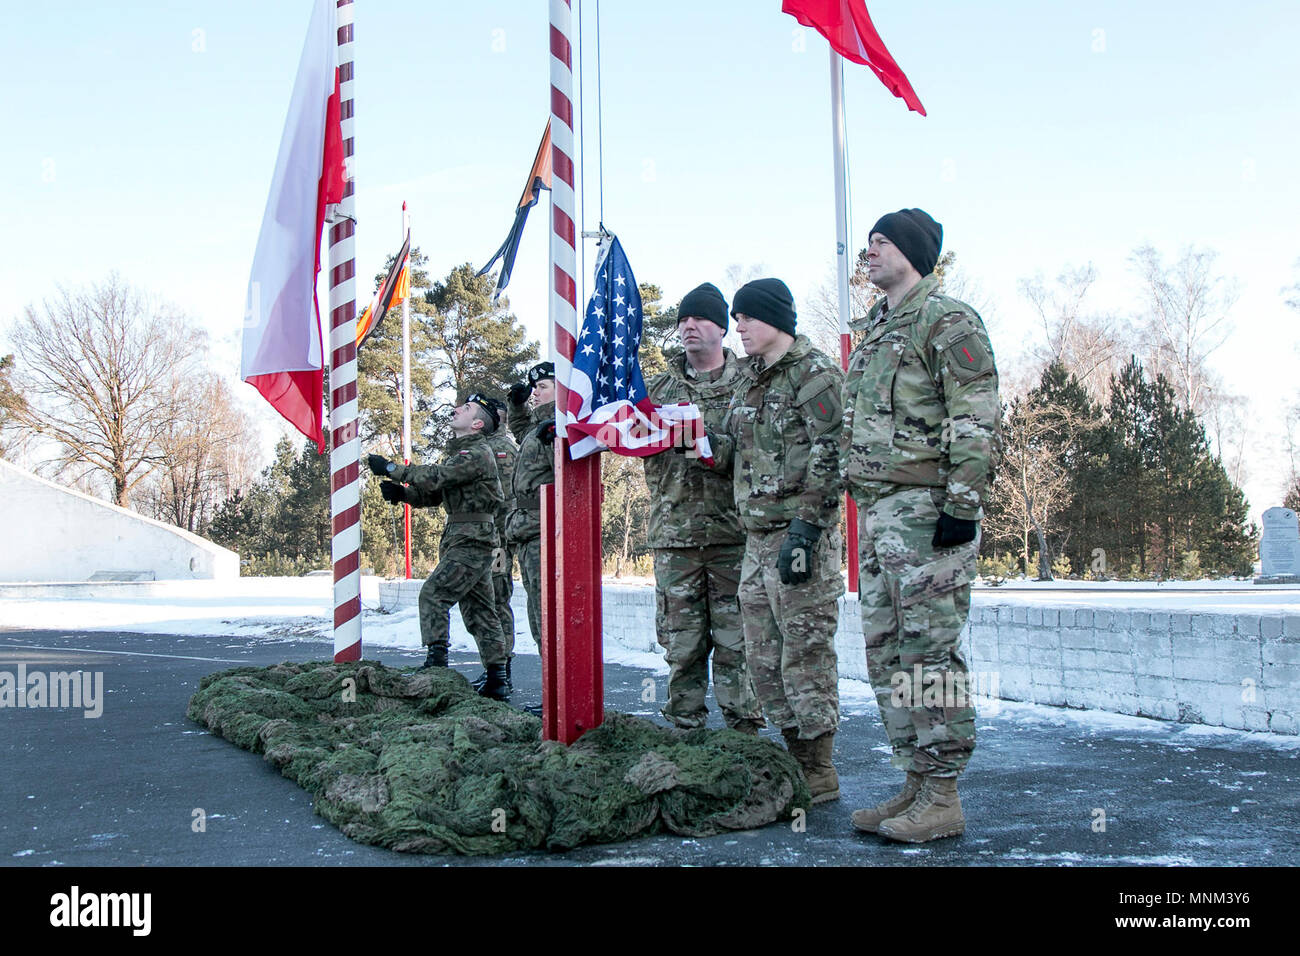 Soldiers of the Polish and U.S. armies take turns hoisting their nation's flags during the playing of their respective national anthems during a welcoming ceremony held in Świętoszów, Poland, for the U.S. 2nd Battalion, 70th Armor Regiment's arrival in Poland, March 19, 2018. Stock Photo